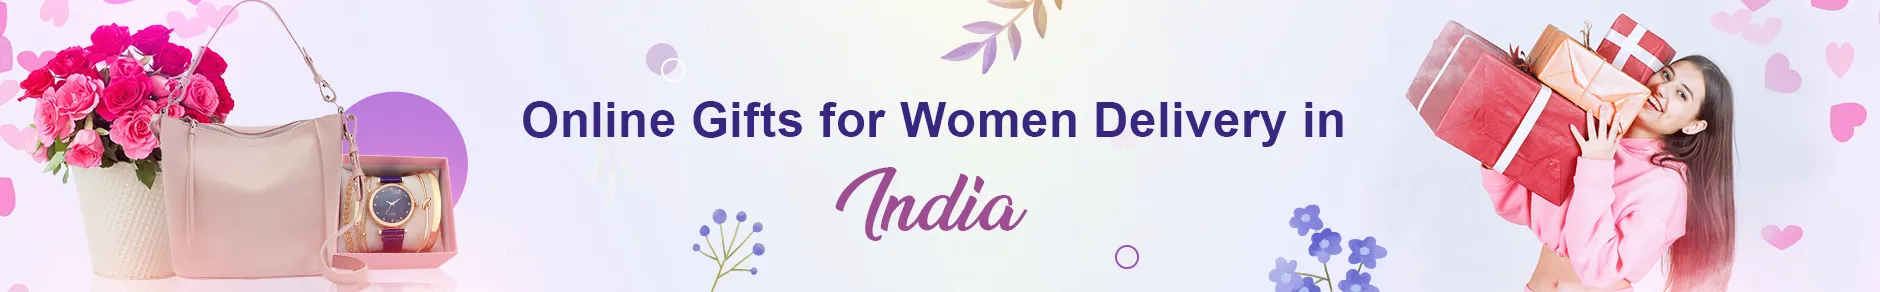 Gifts for Women to India